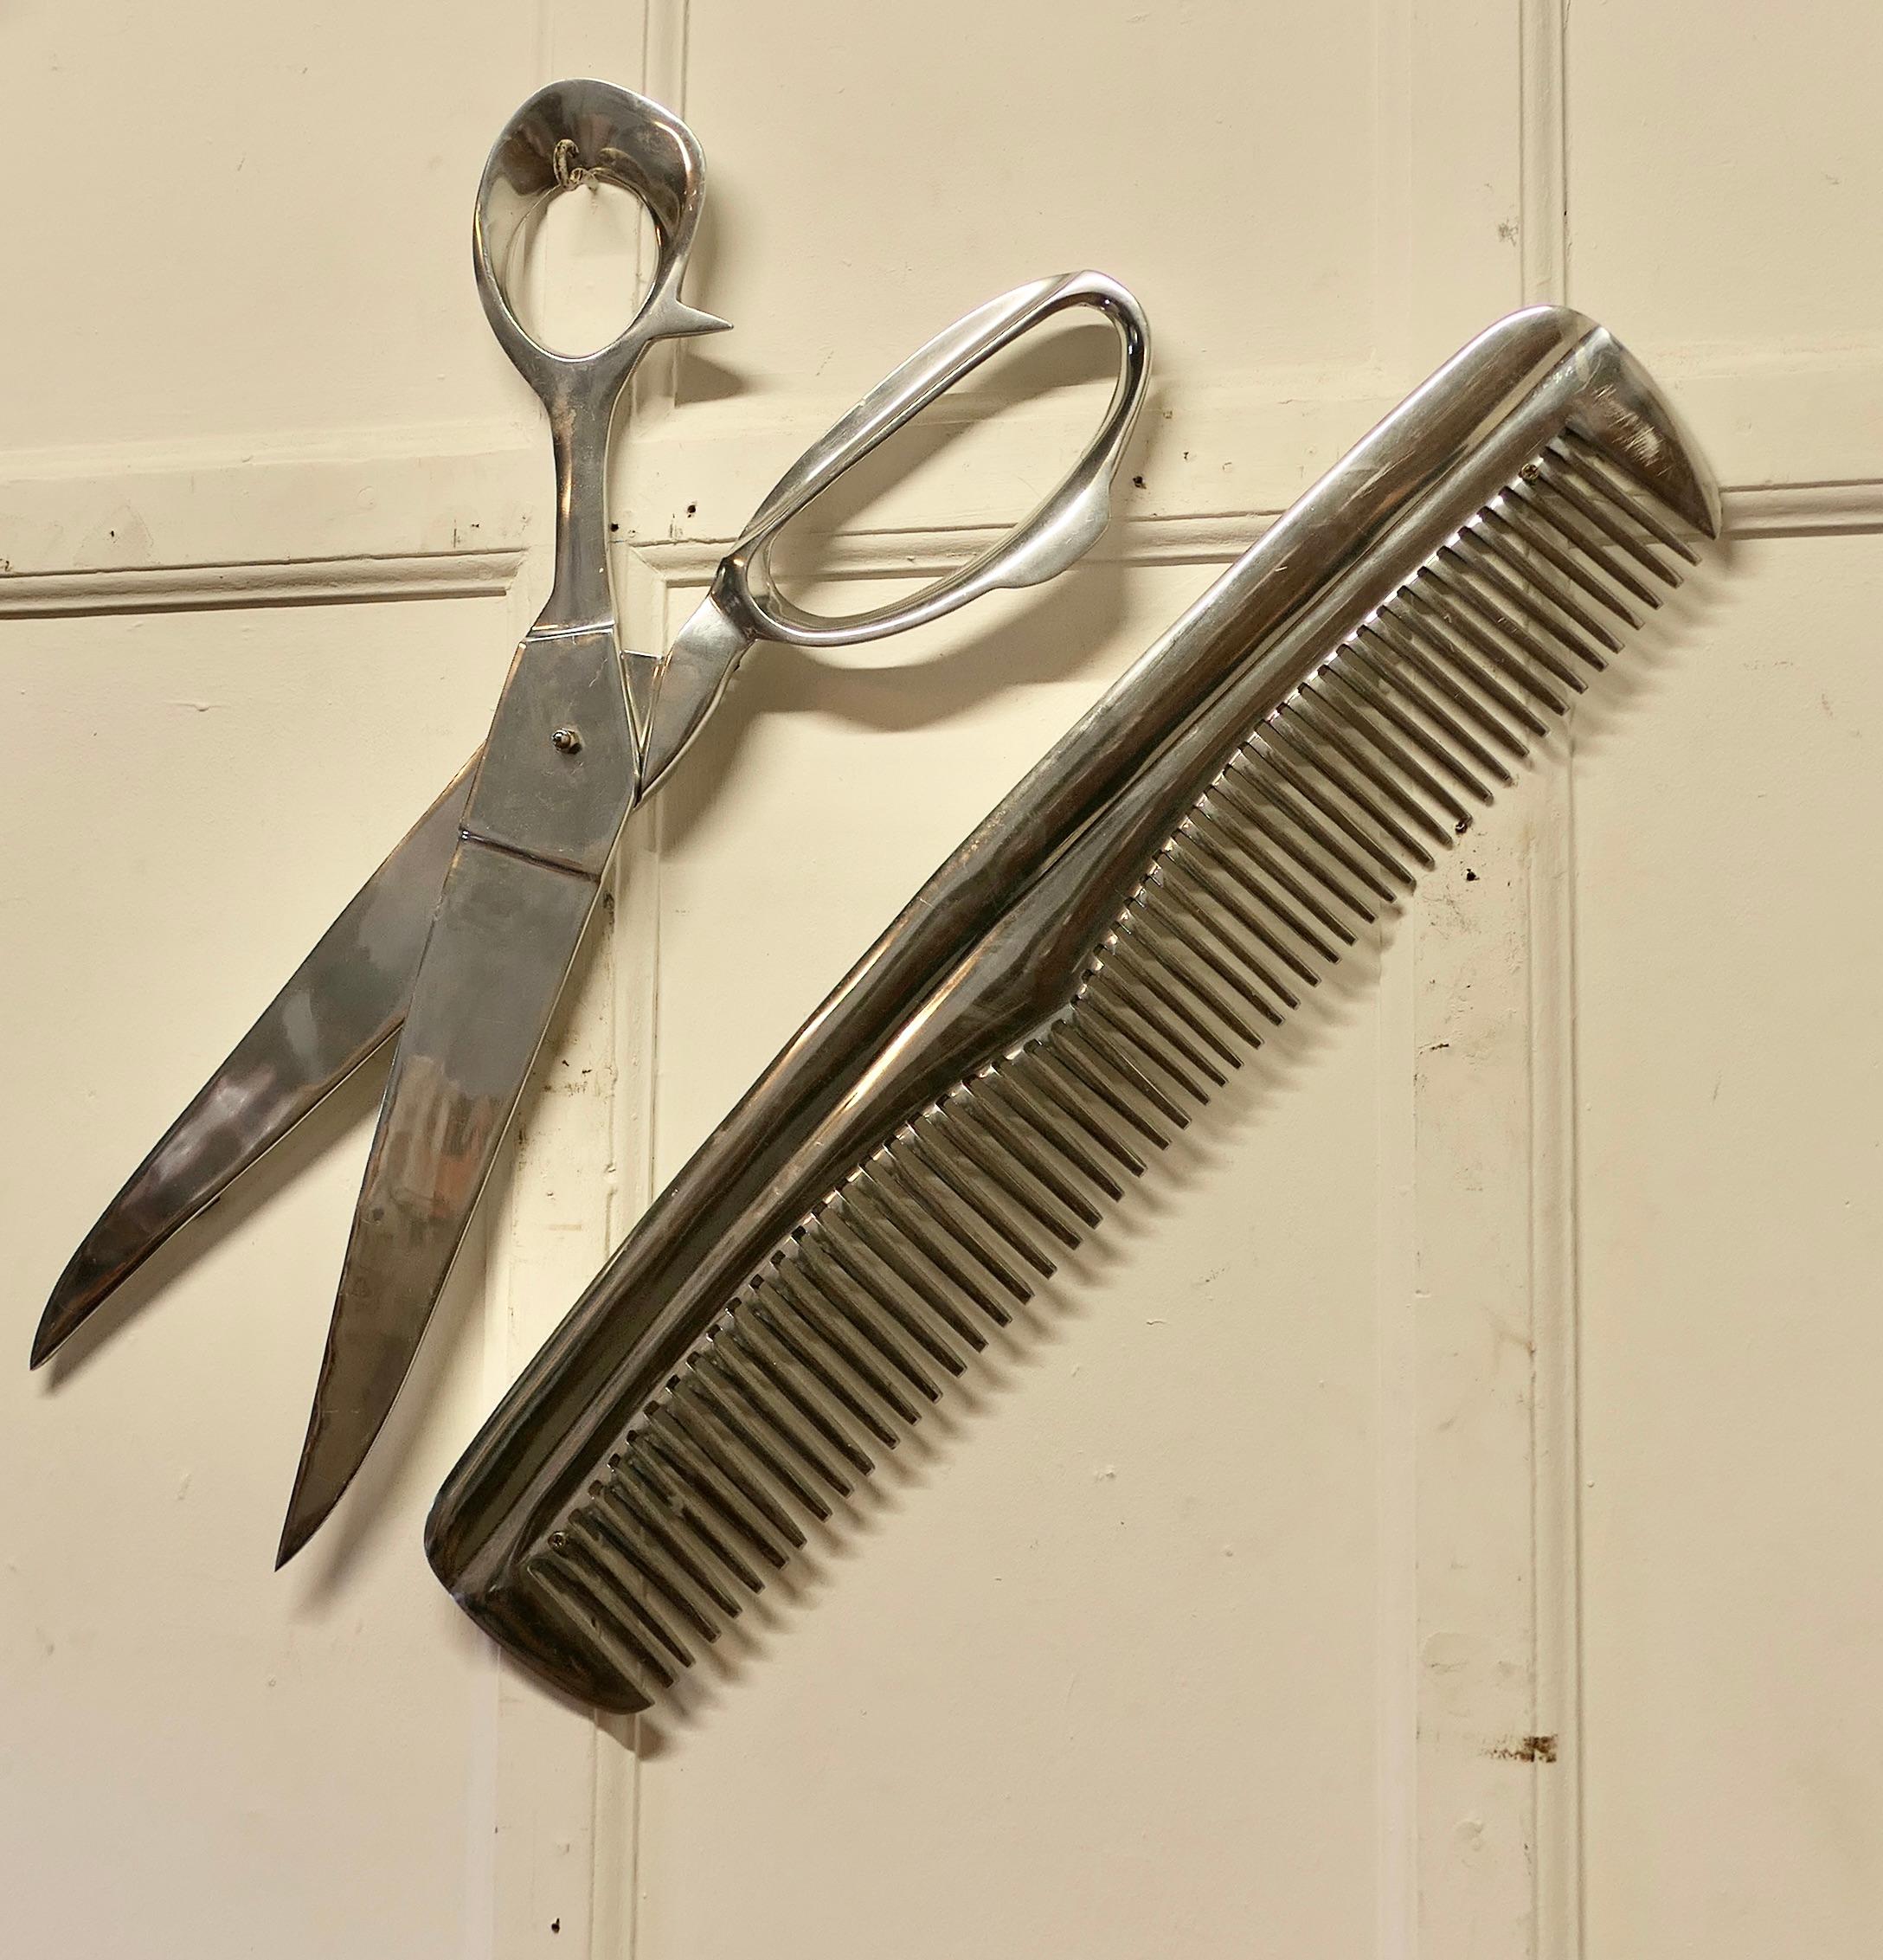 Folk Art Barber Shop Trade Sign, Giant Comb and Scissors   Larger than life  For Sale